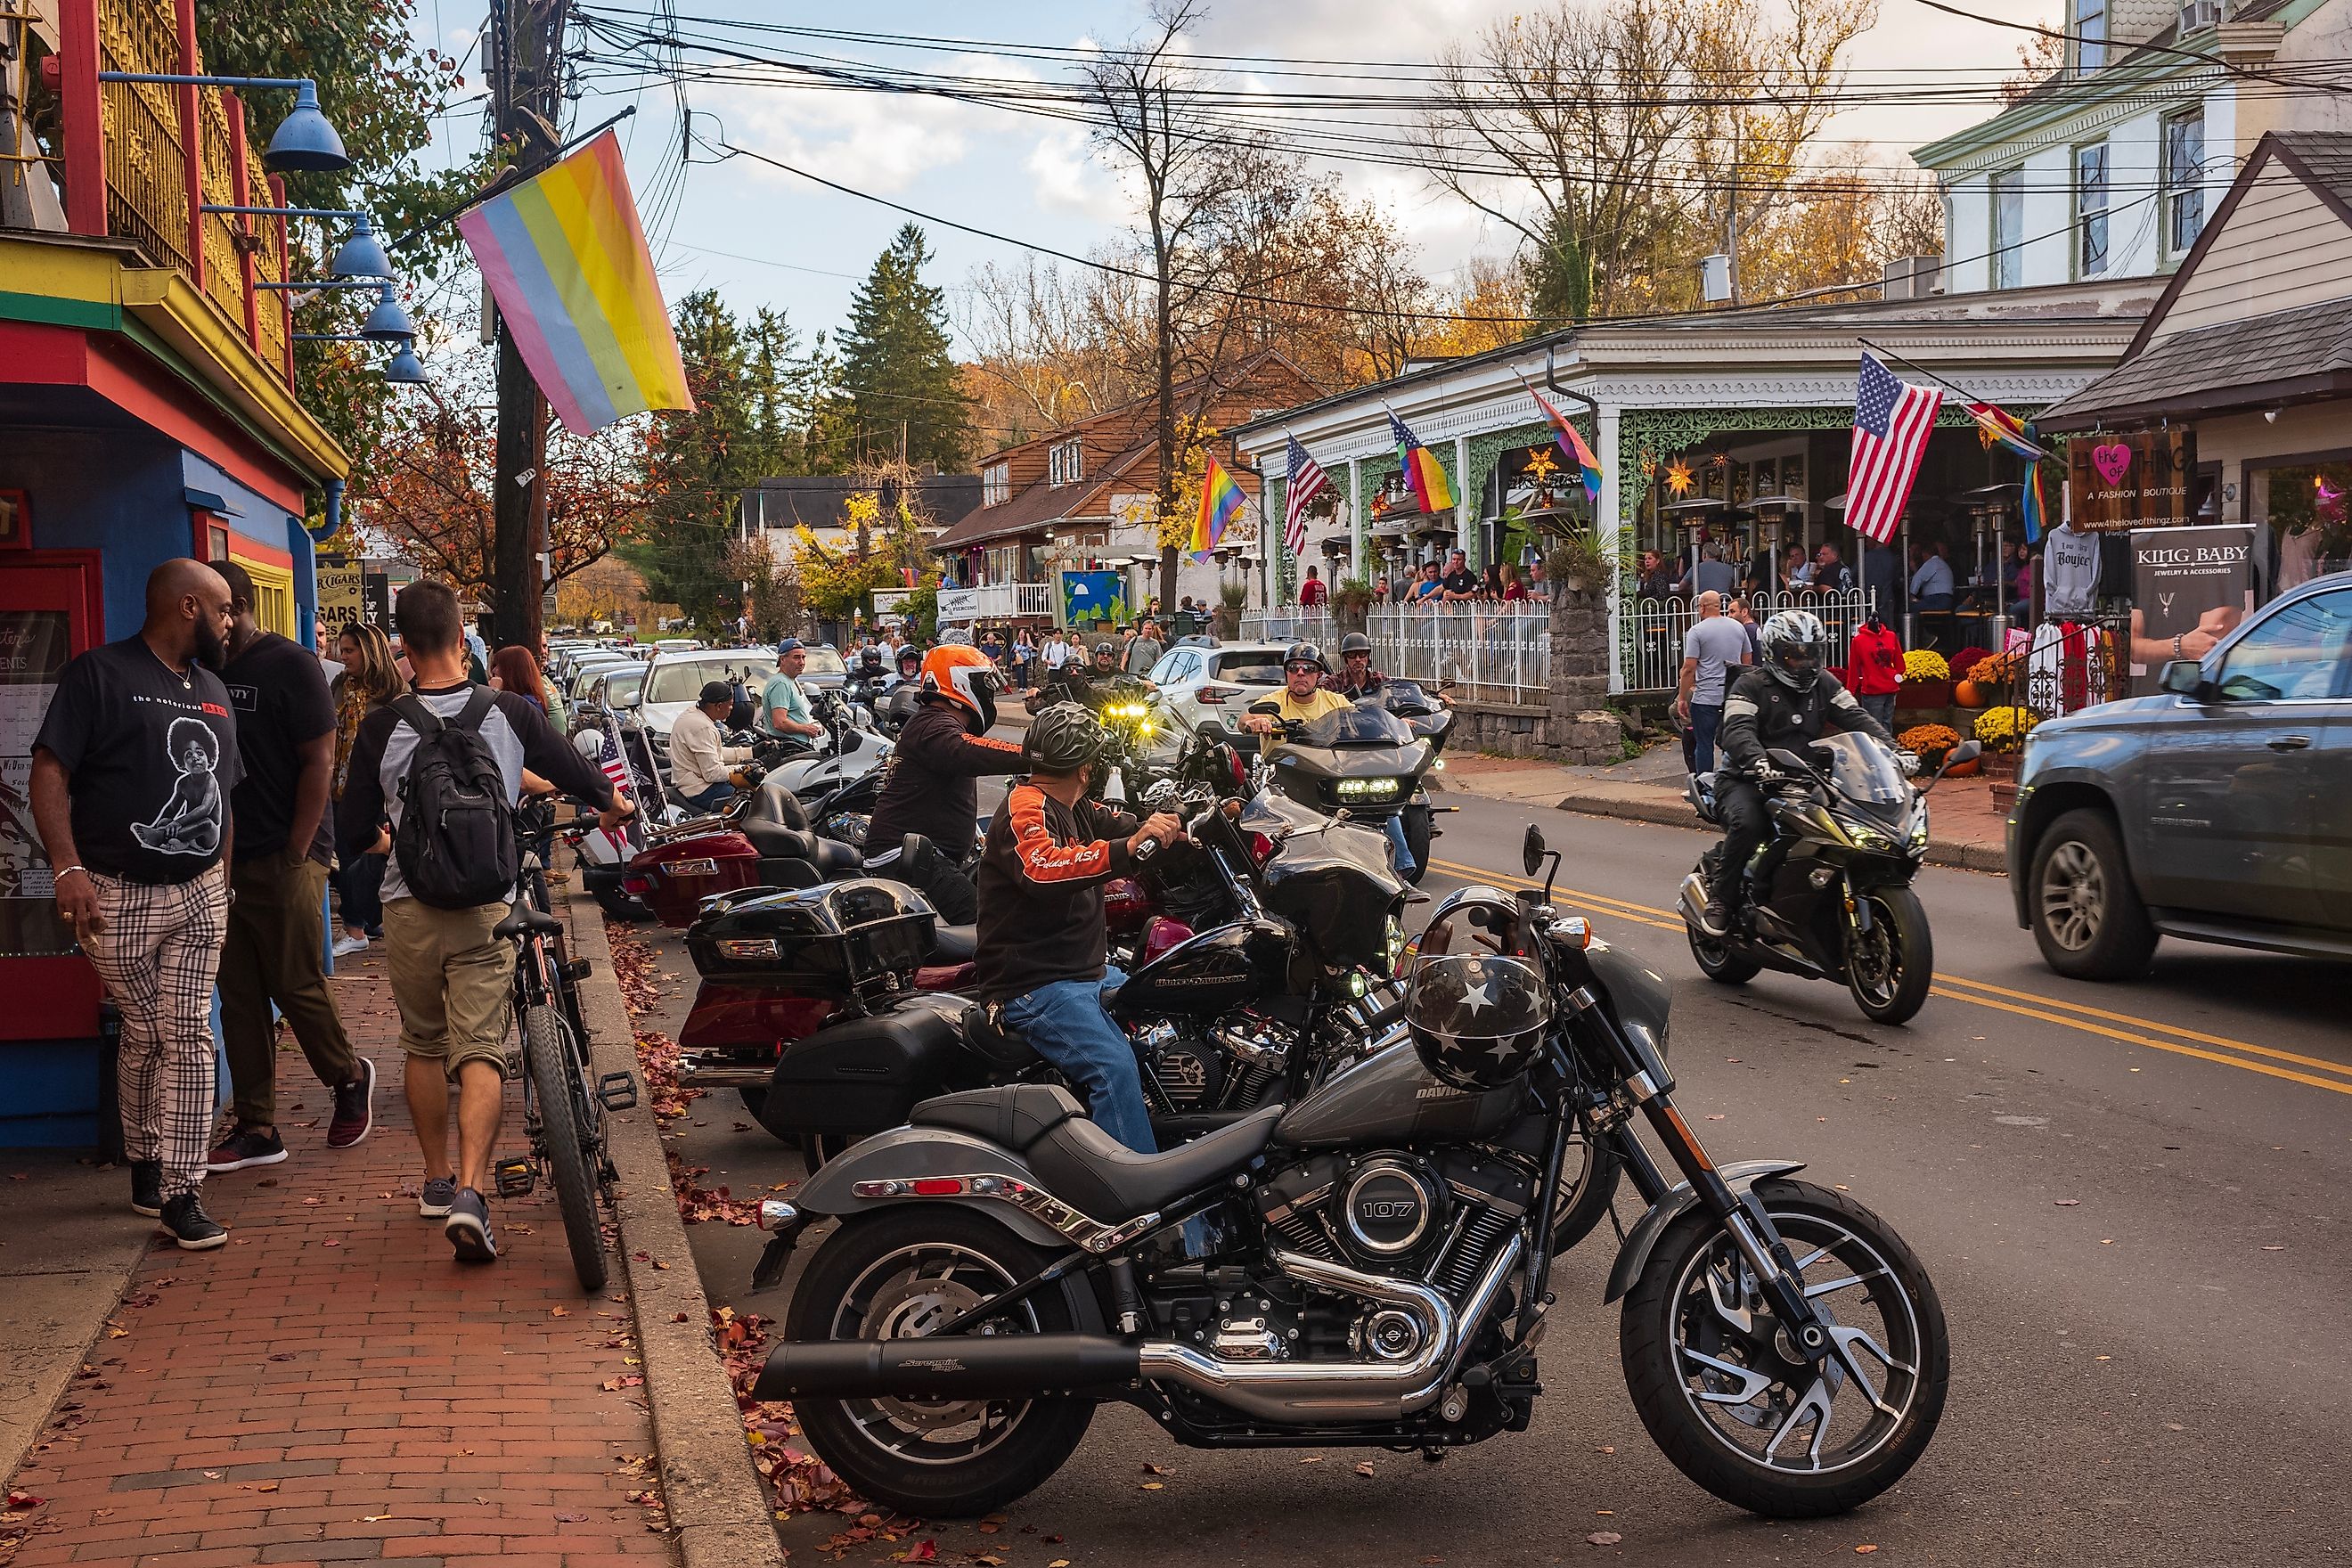 Main Street in New Hope, Pennsylvania, bustling with activity as exotic motorcycles and cars cruise by, highlighting the town's popularity as a travel destination. Editorial credit: JWCohen / Shutterstock.com